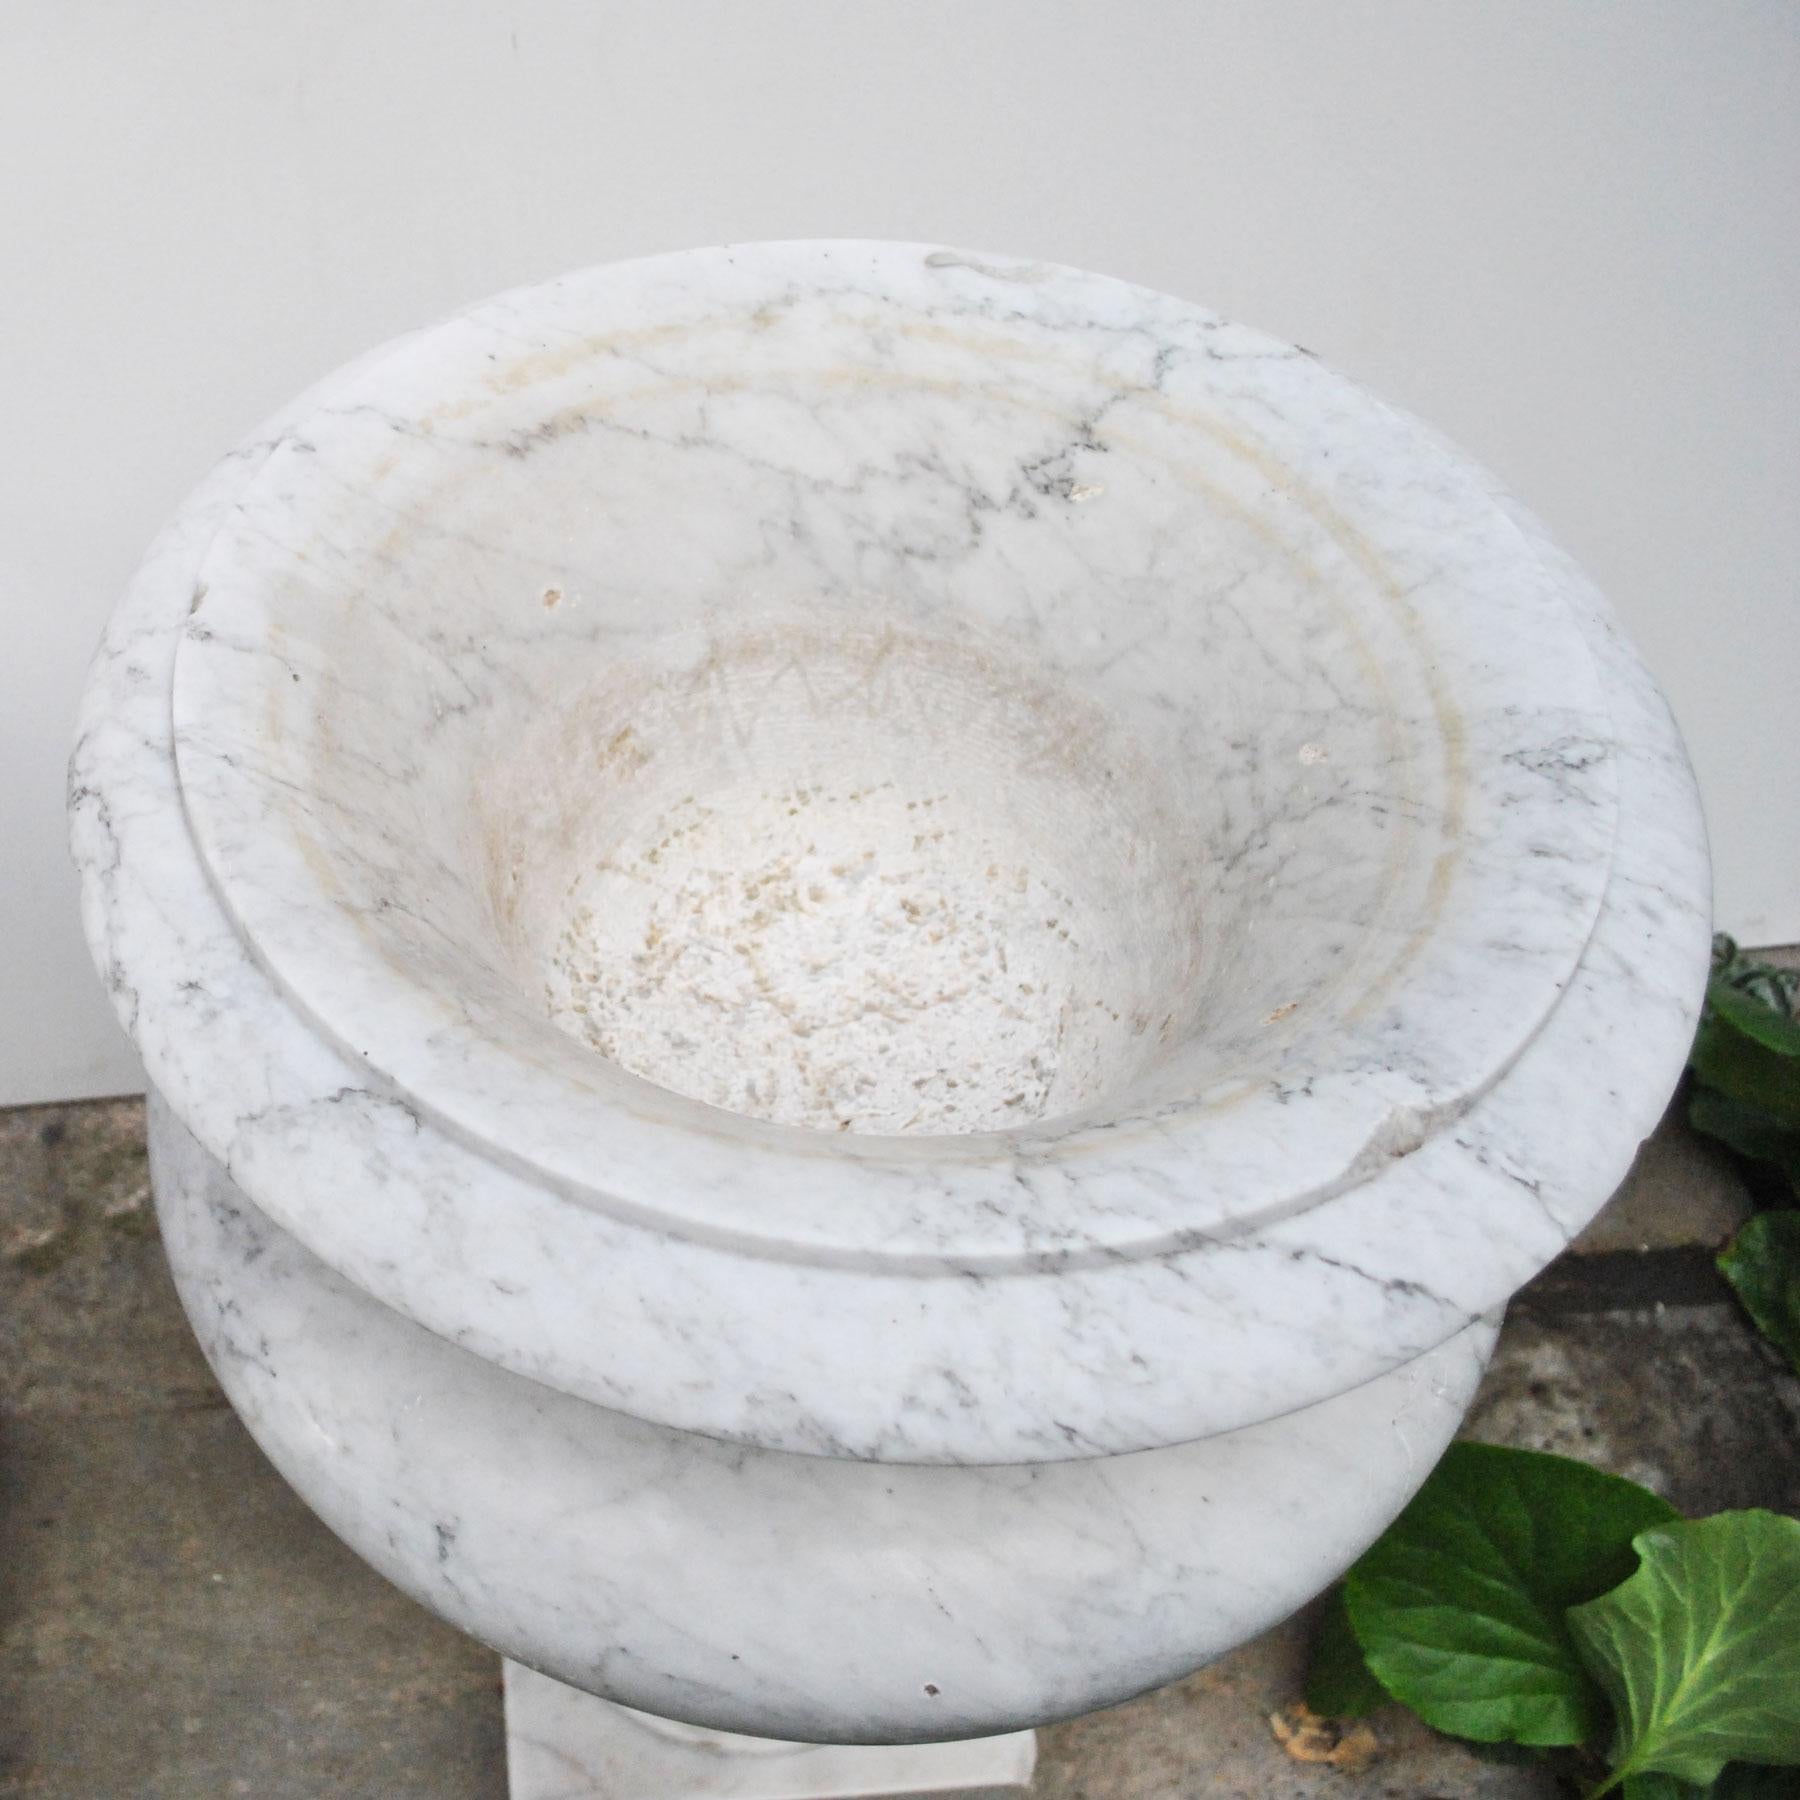 Elegant Pair of Large Carrara Marble Vases, Period Early 20th Century For Sale 7